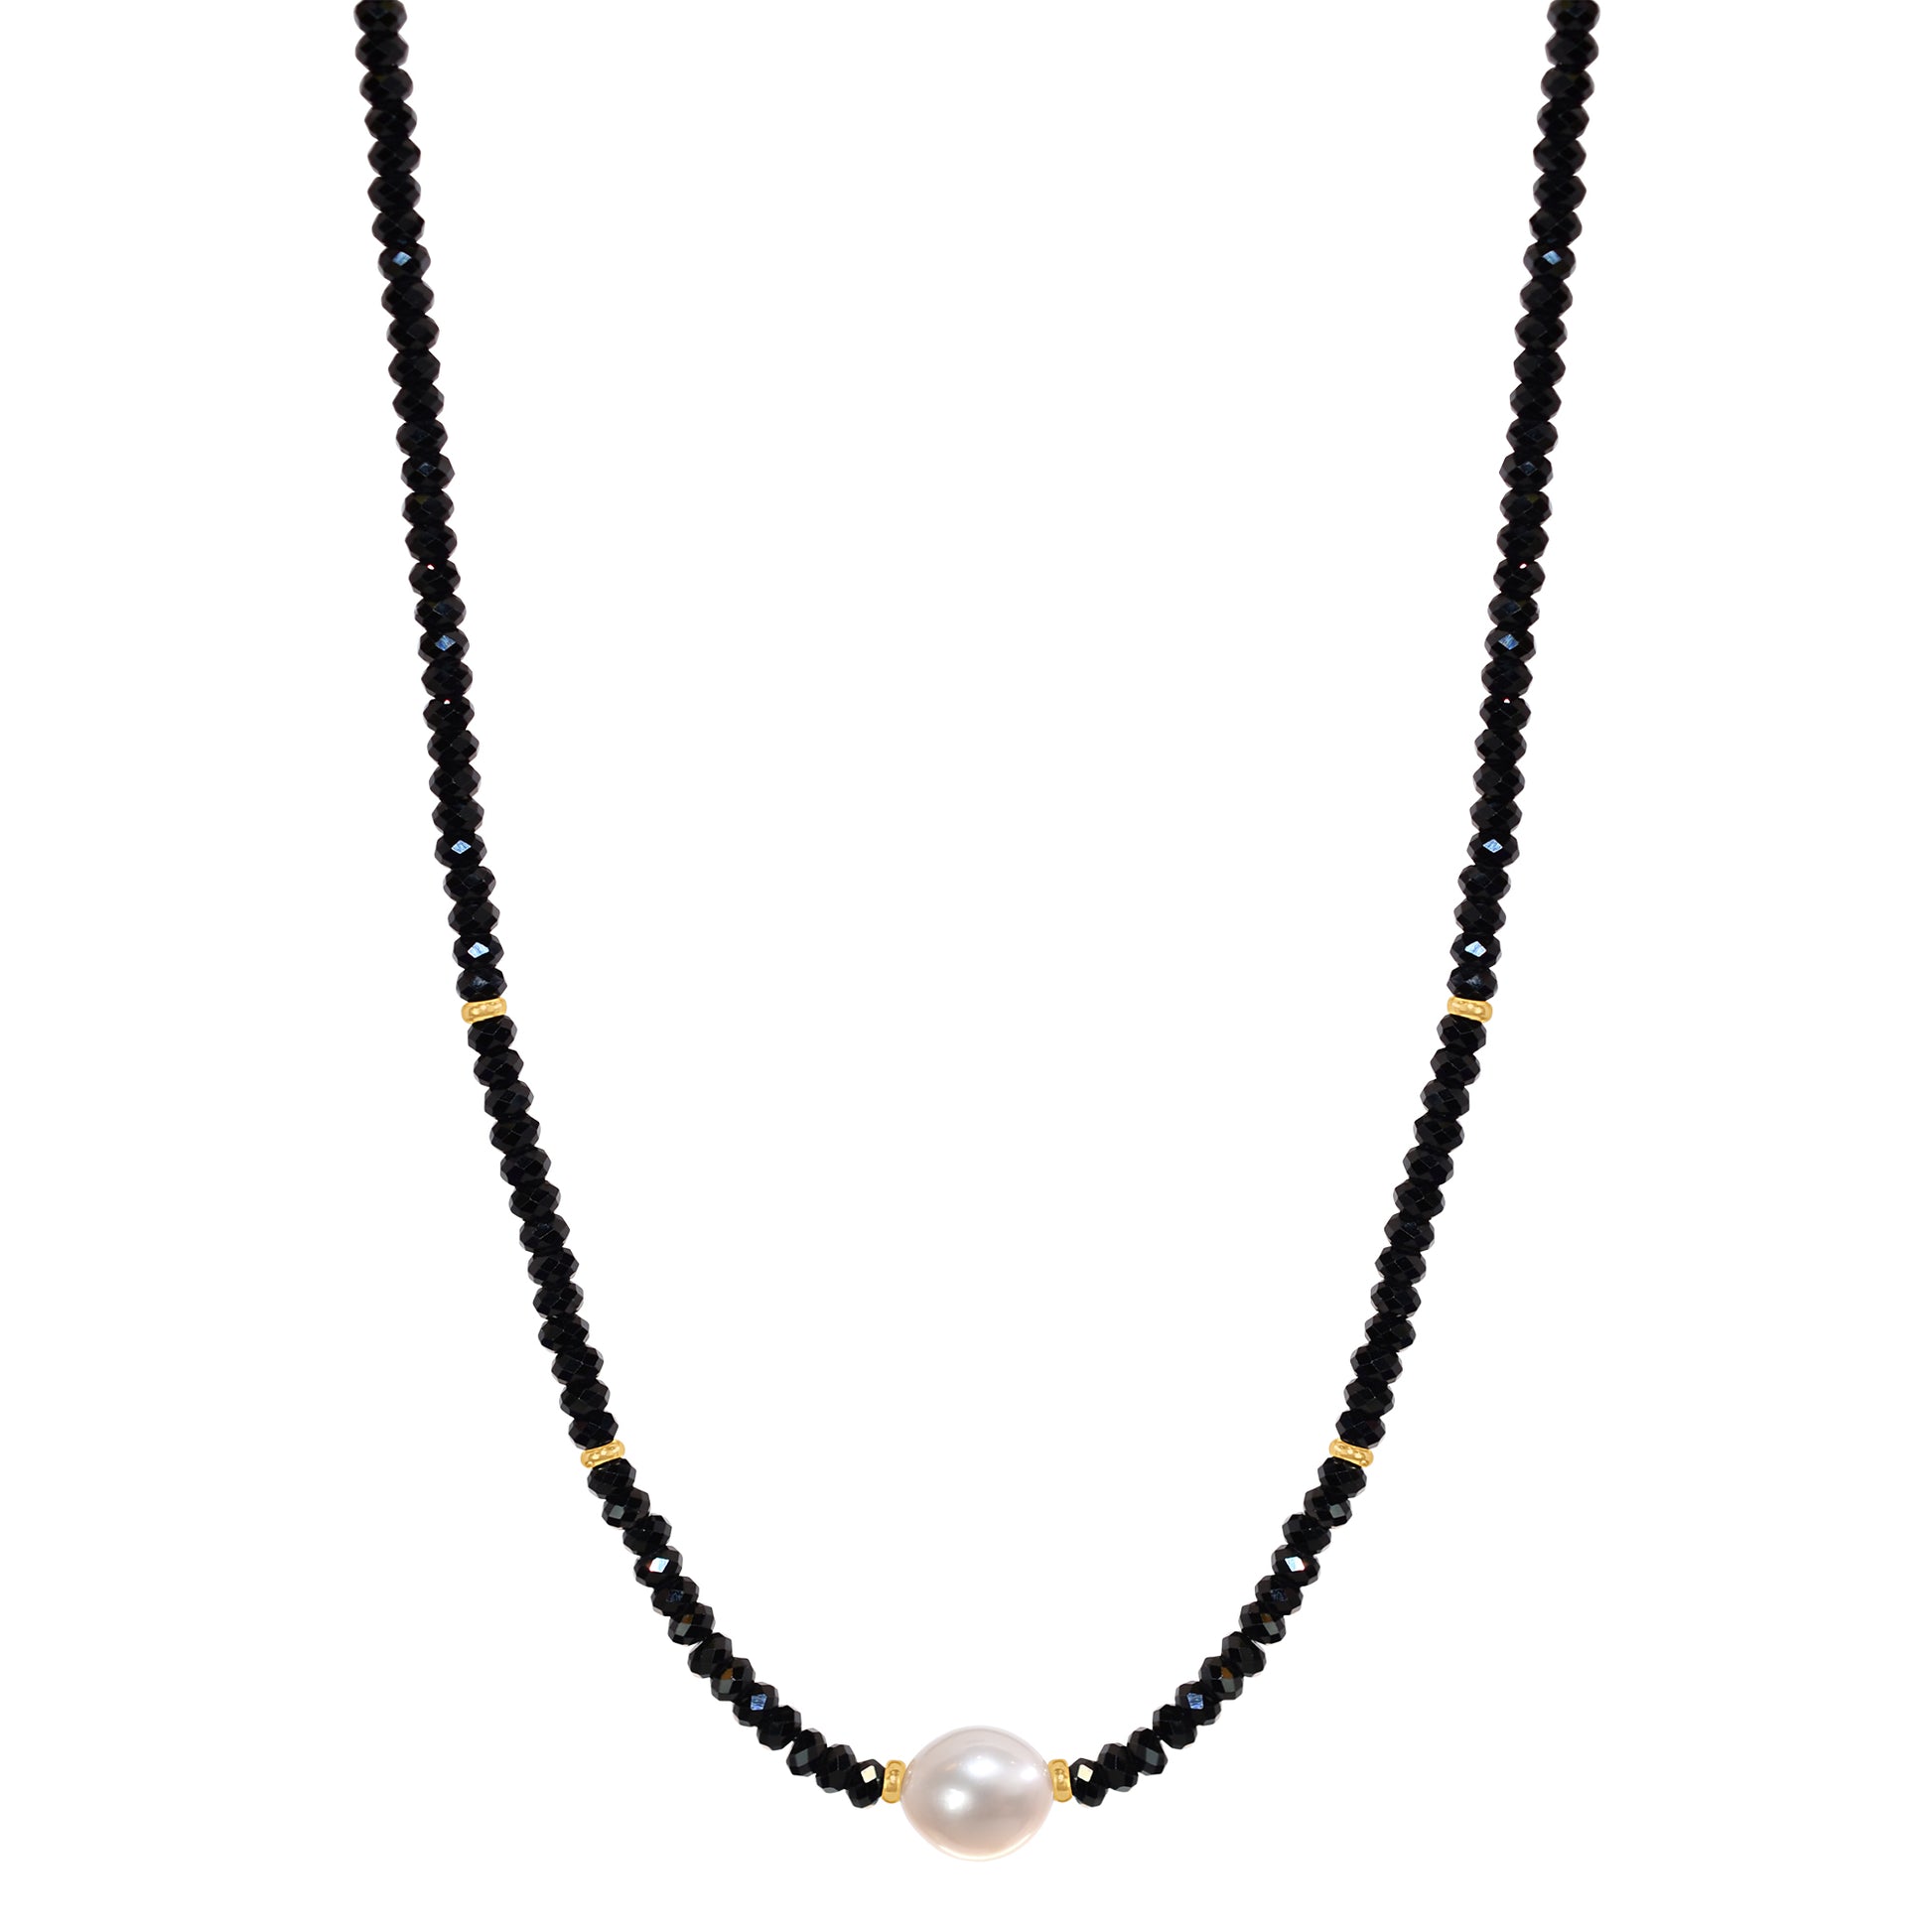 14k Gemstone Freshwater Pearl Center Necklace 17" Black Spinel & White Pearl